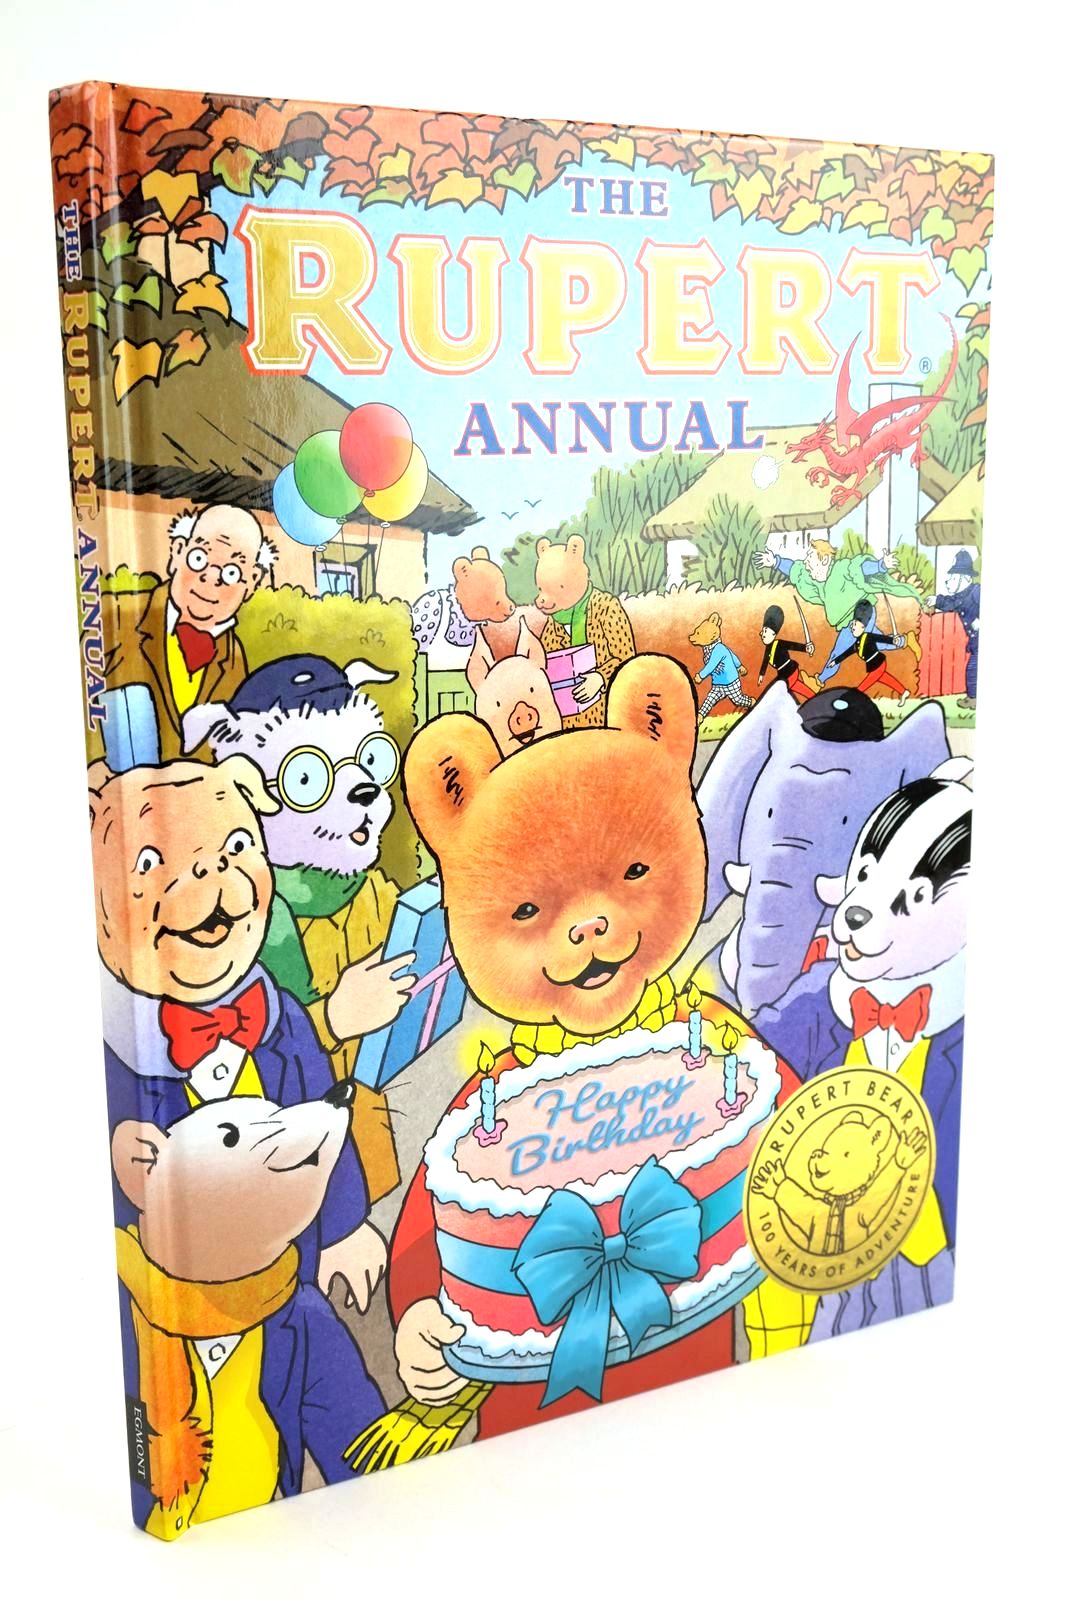 Photo of RUPERT ANNUAL 2020 written by Trotter, Stuart
Alperin, Mara illustrated by Bestall, Alfred
Harrold, John
Trotter, Stuart published by Egmont Books Limited (STOCK CODE: 1323540)  for sale by Stella & Rose's Books